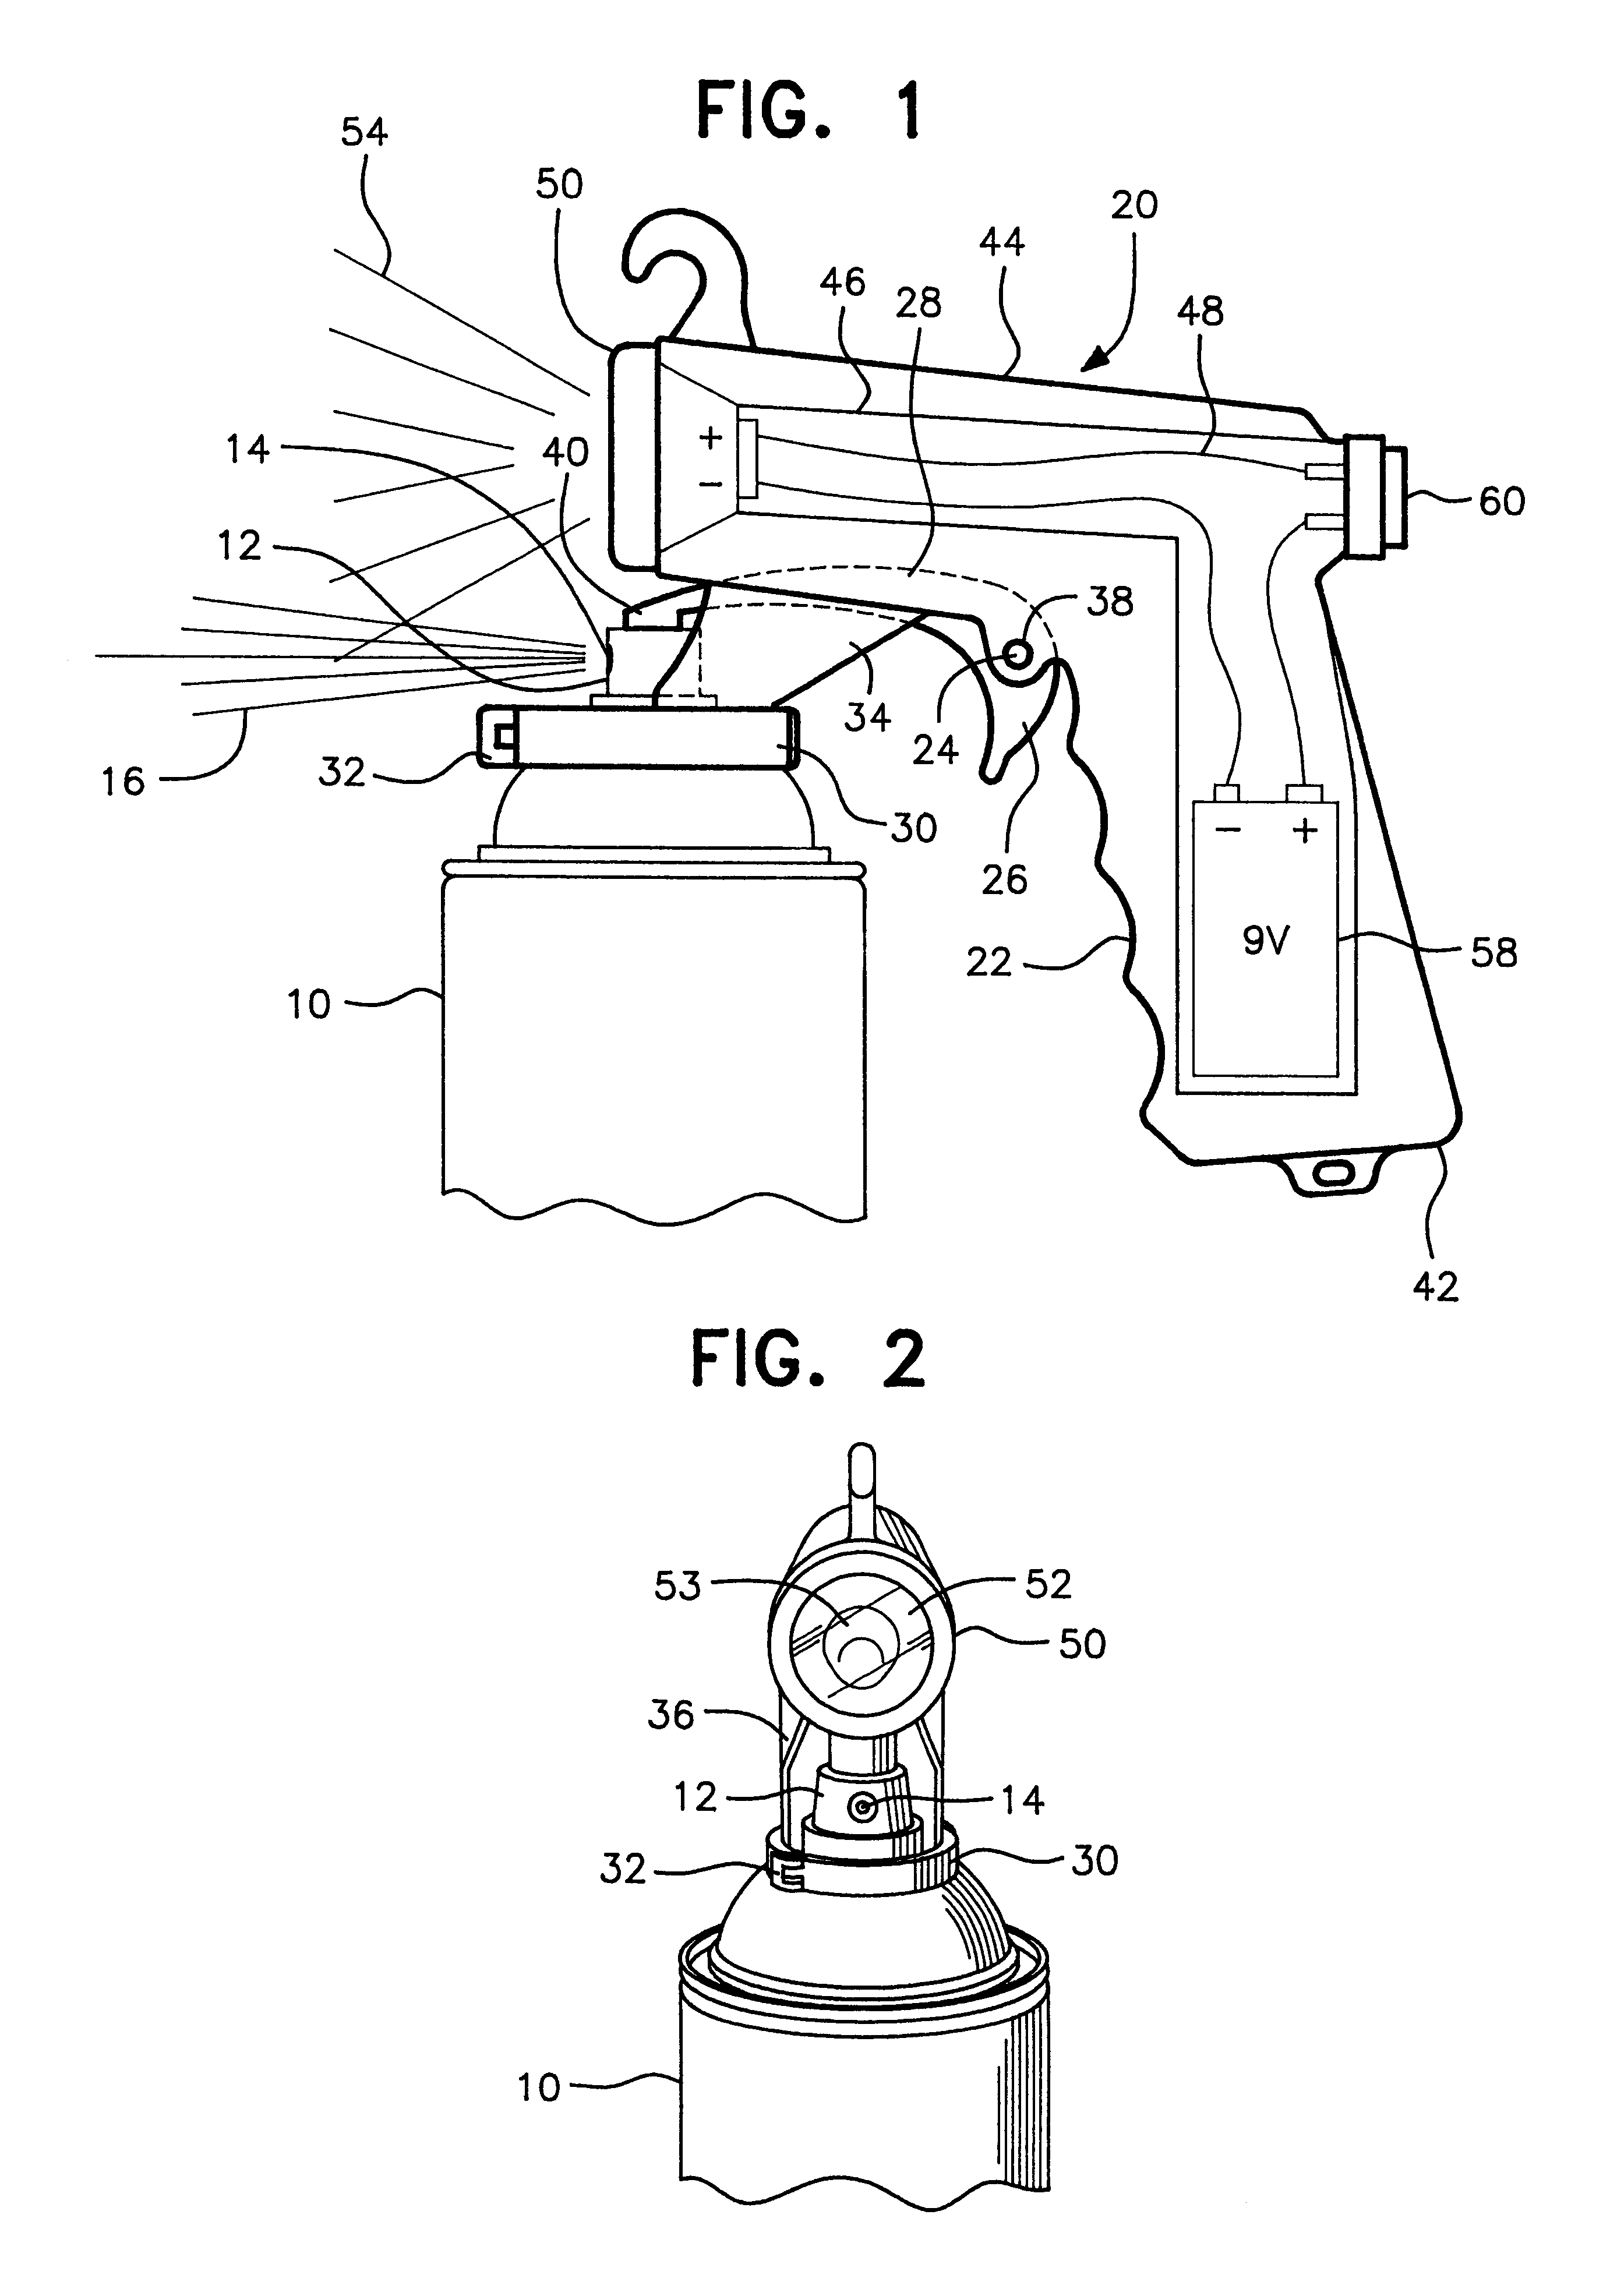 Illuminating pistol-type device for a plunger actuated aerosol can